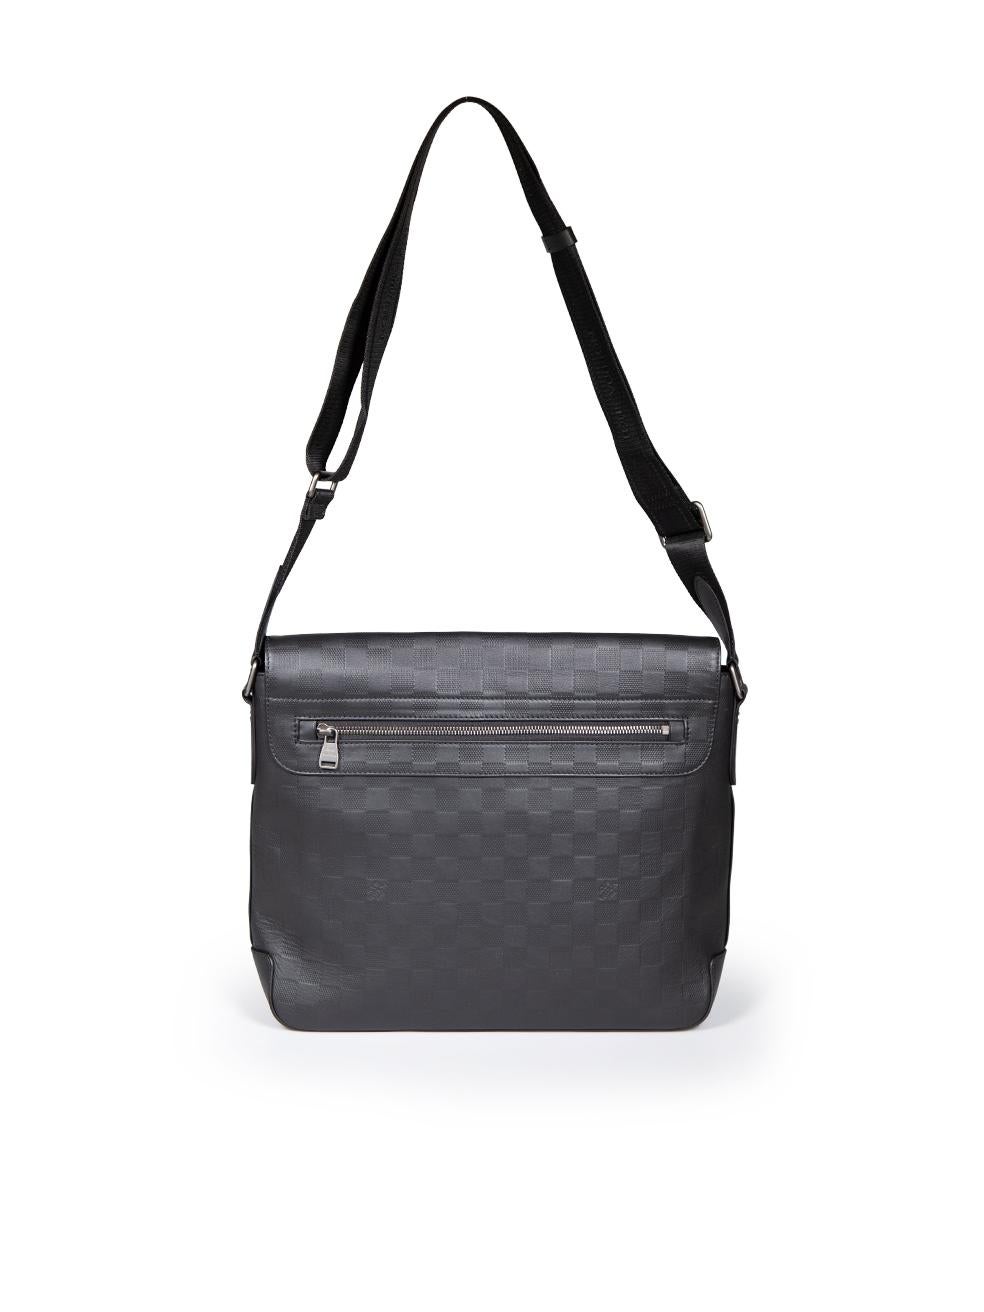 Louis Vuitton 2016 Black Onyx Damier Infini District MM Bag In Excellent Condition For Sale In London, GB